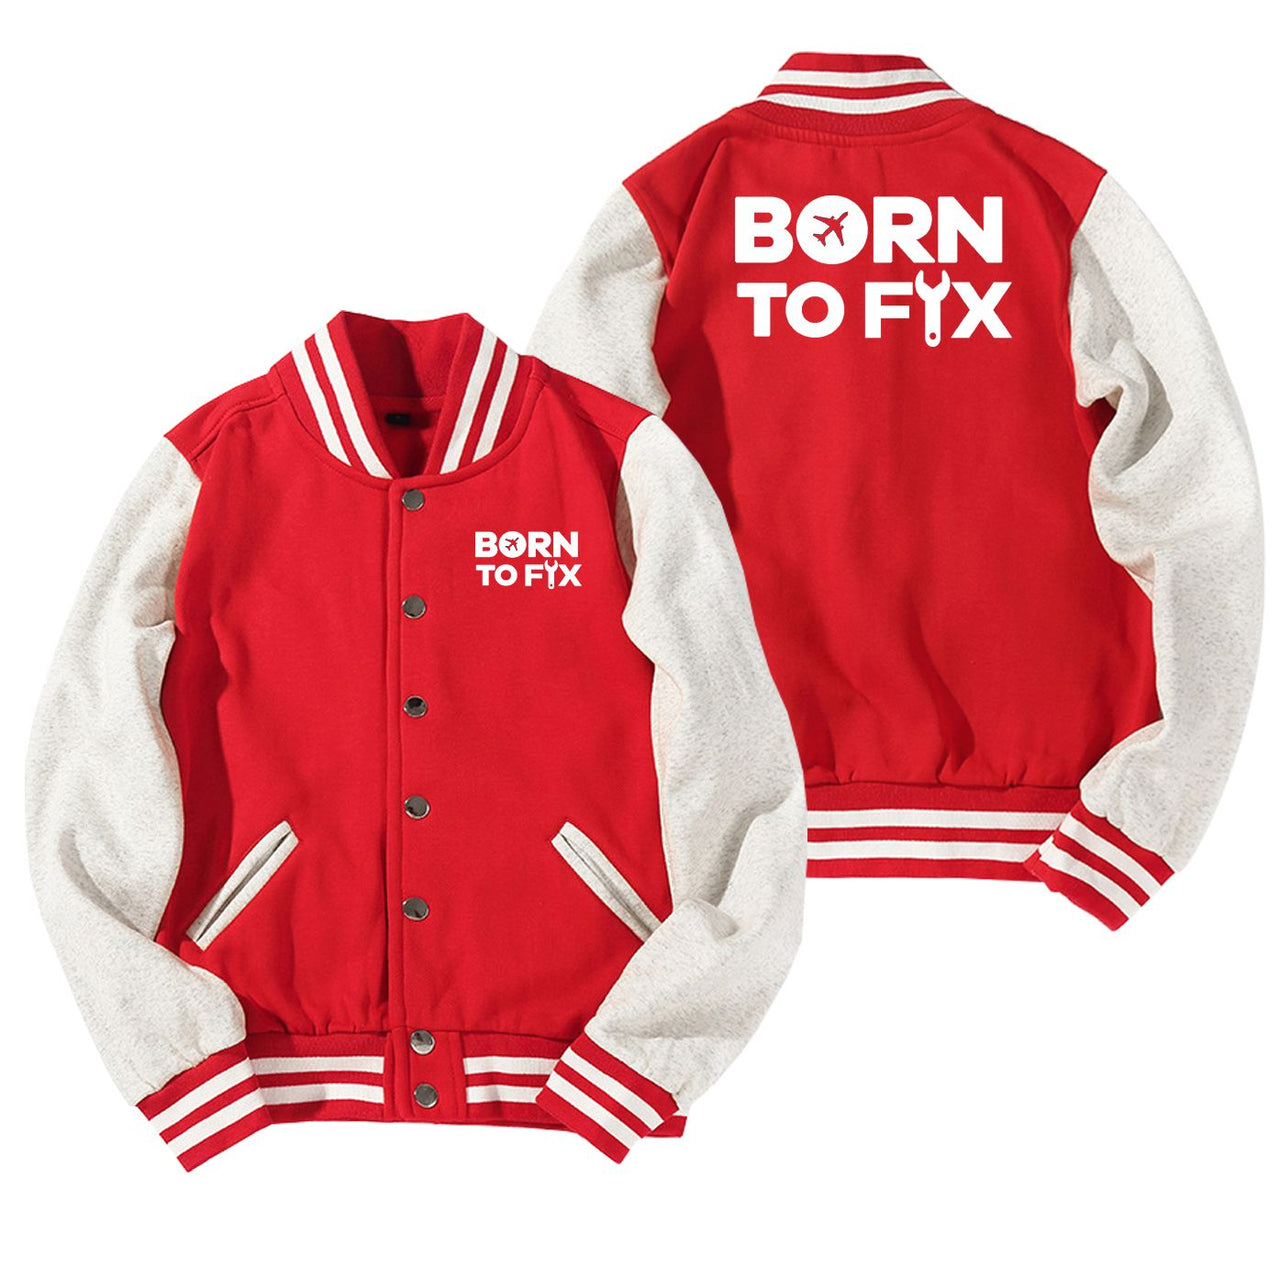 Born To Fix Airplanes Designed Baseball Style Jackets